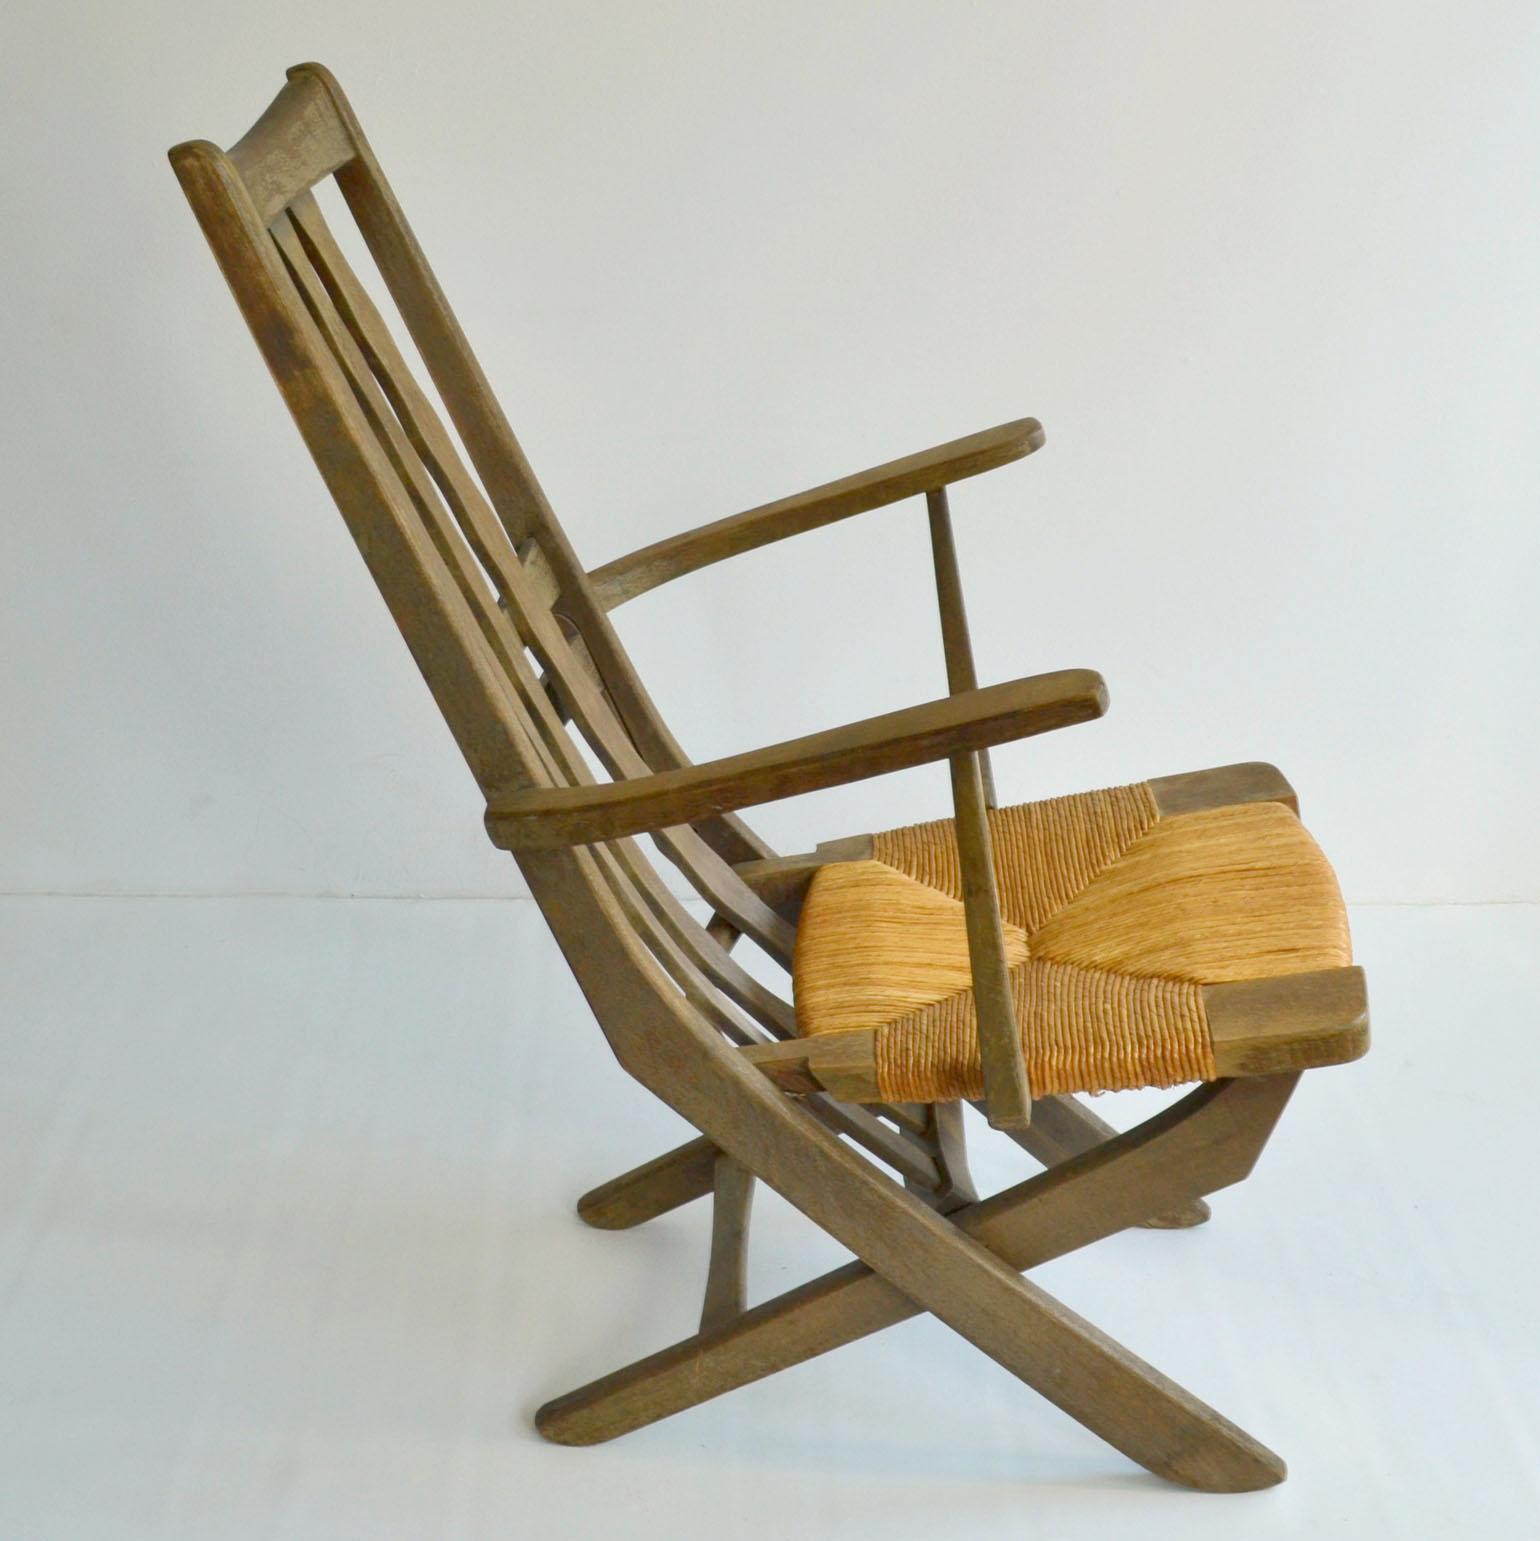 Pair of French Modernist Outdoor Oak Chairs, French, 1950s For Sale 5